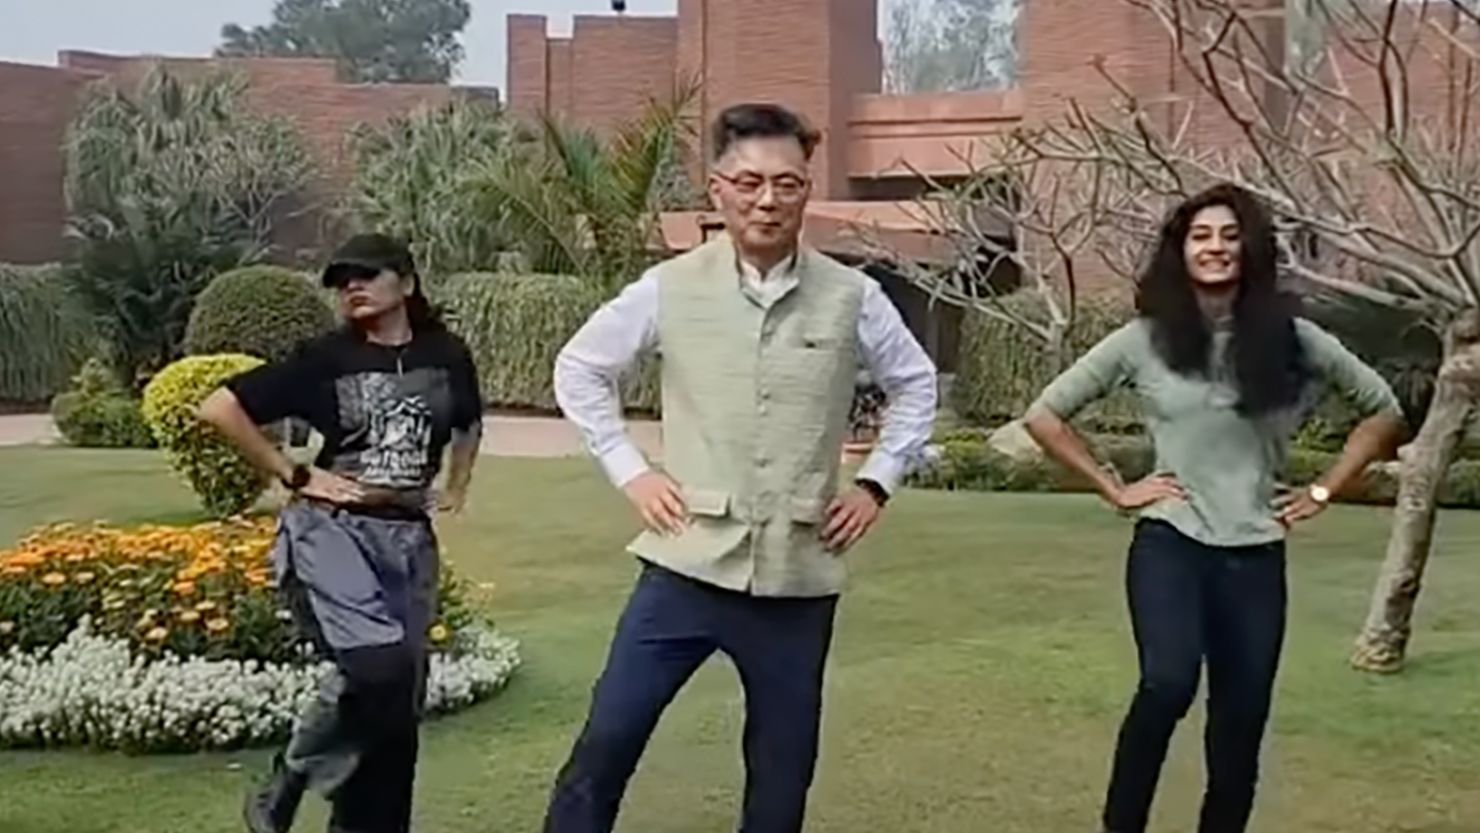 South Korean diplomats strike a pose in their "Naatu Naatu" dance cover at the country's embassy in New Delhi.